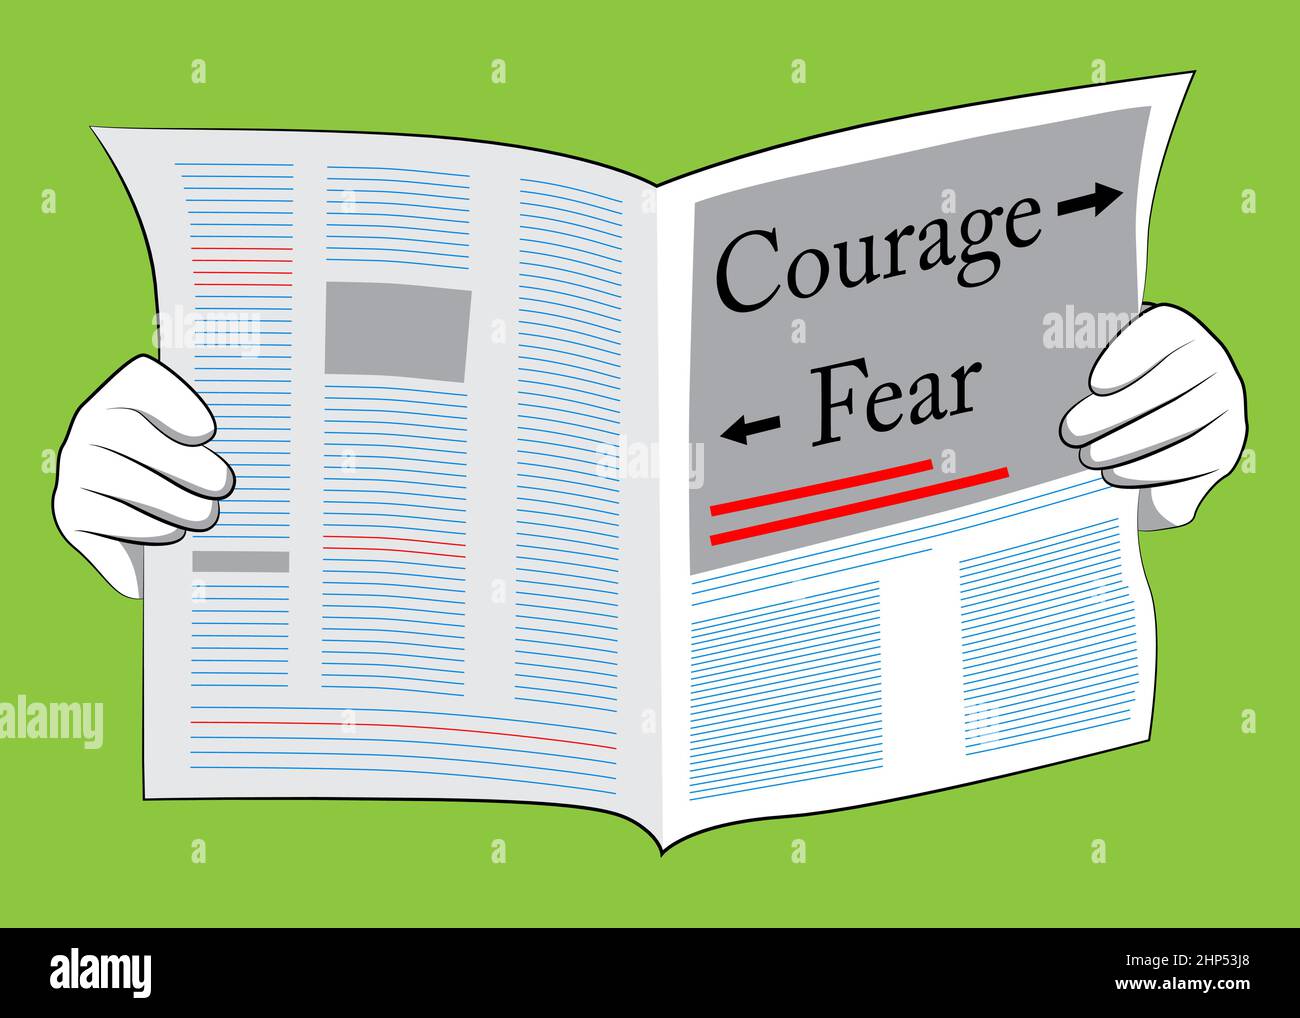 Courage and fear text with arrows as headline. Stock Vector